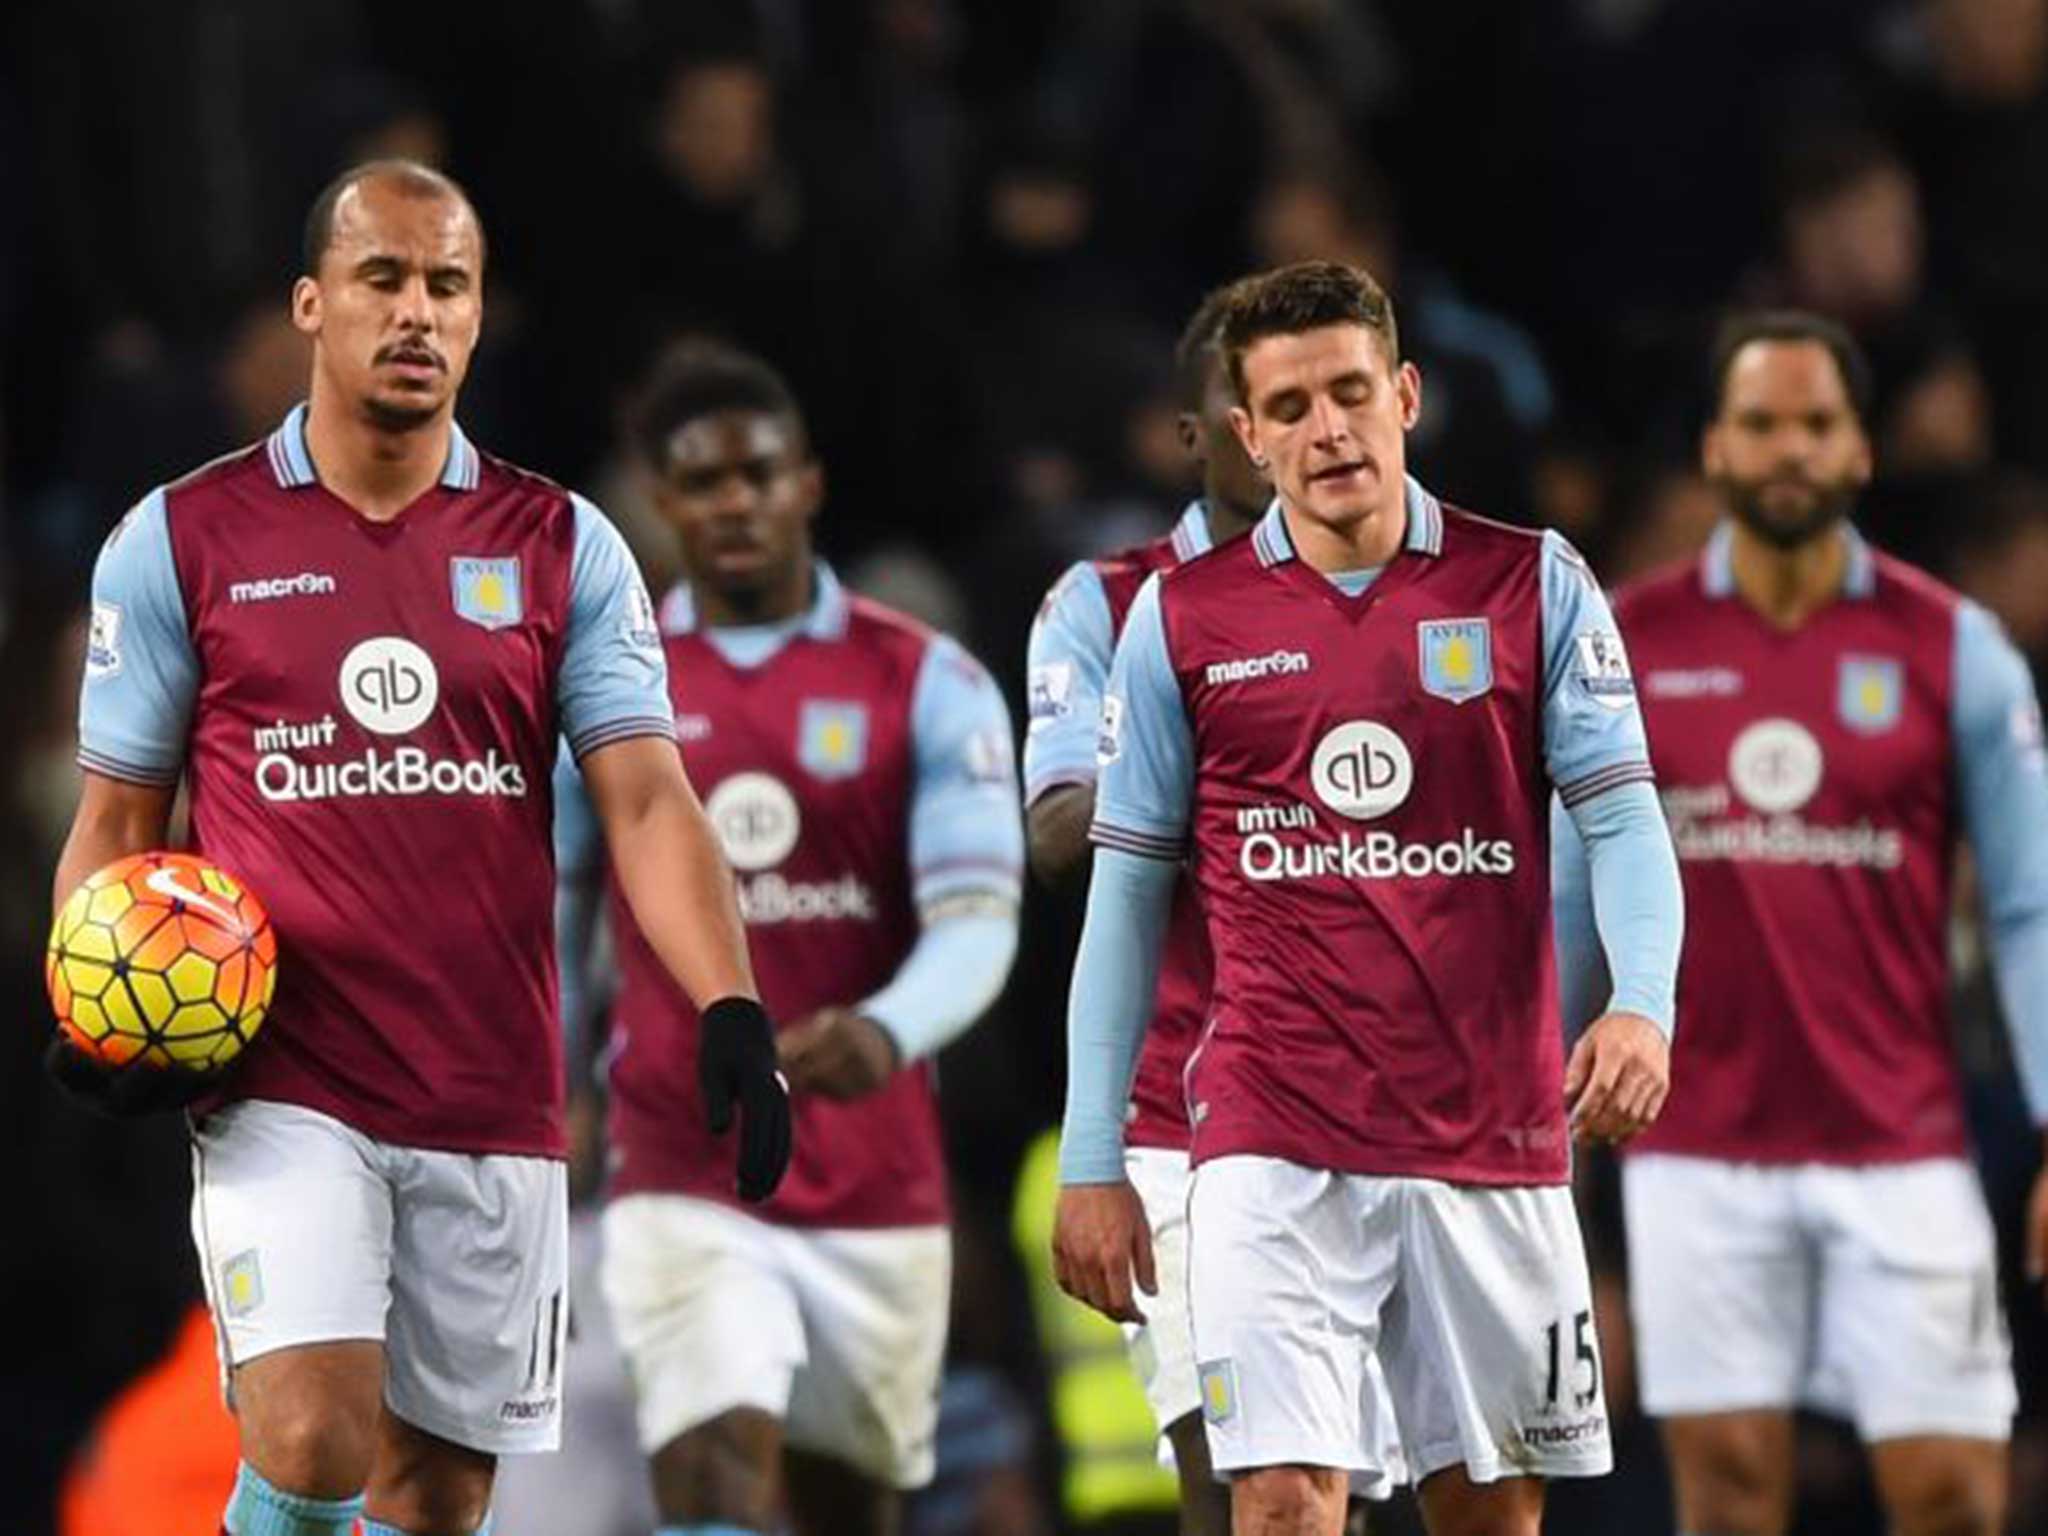 Gabriel Agbonlahor and Ashley Westwood of Aston Villa show their frustration after Everton's third goal